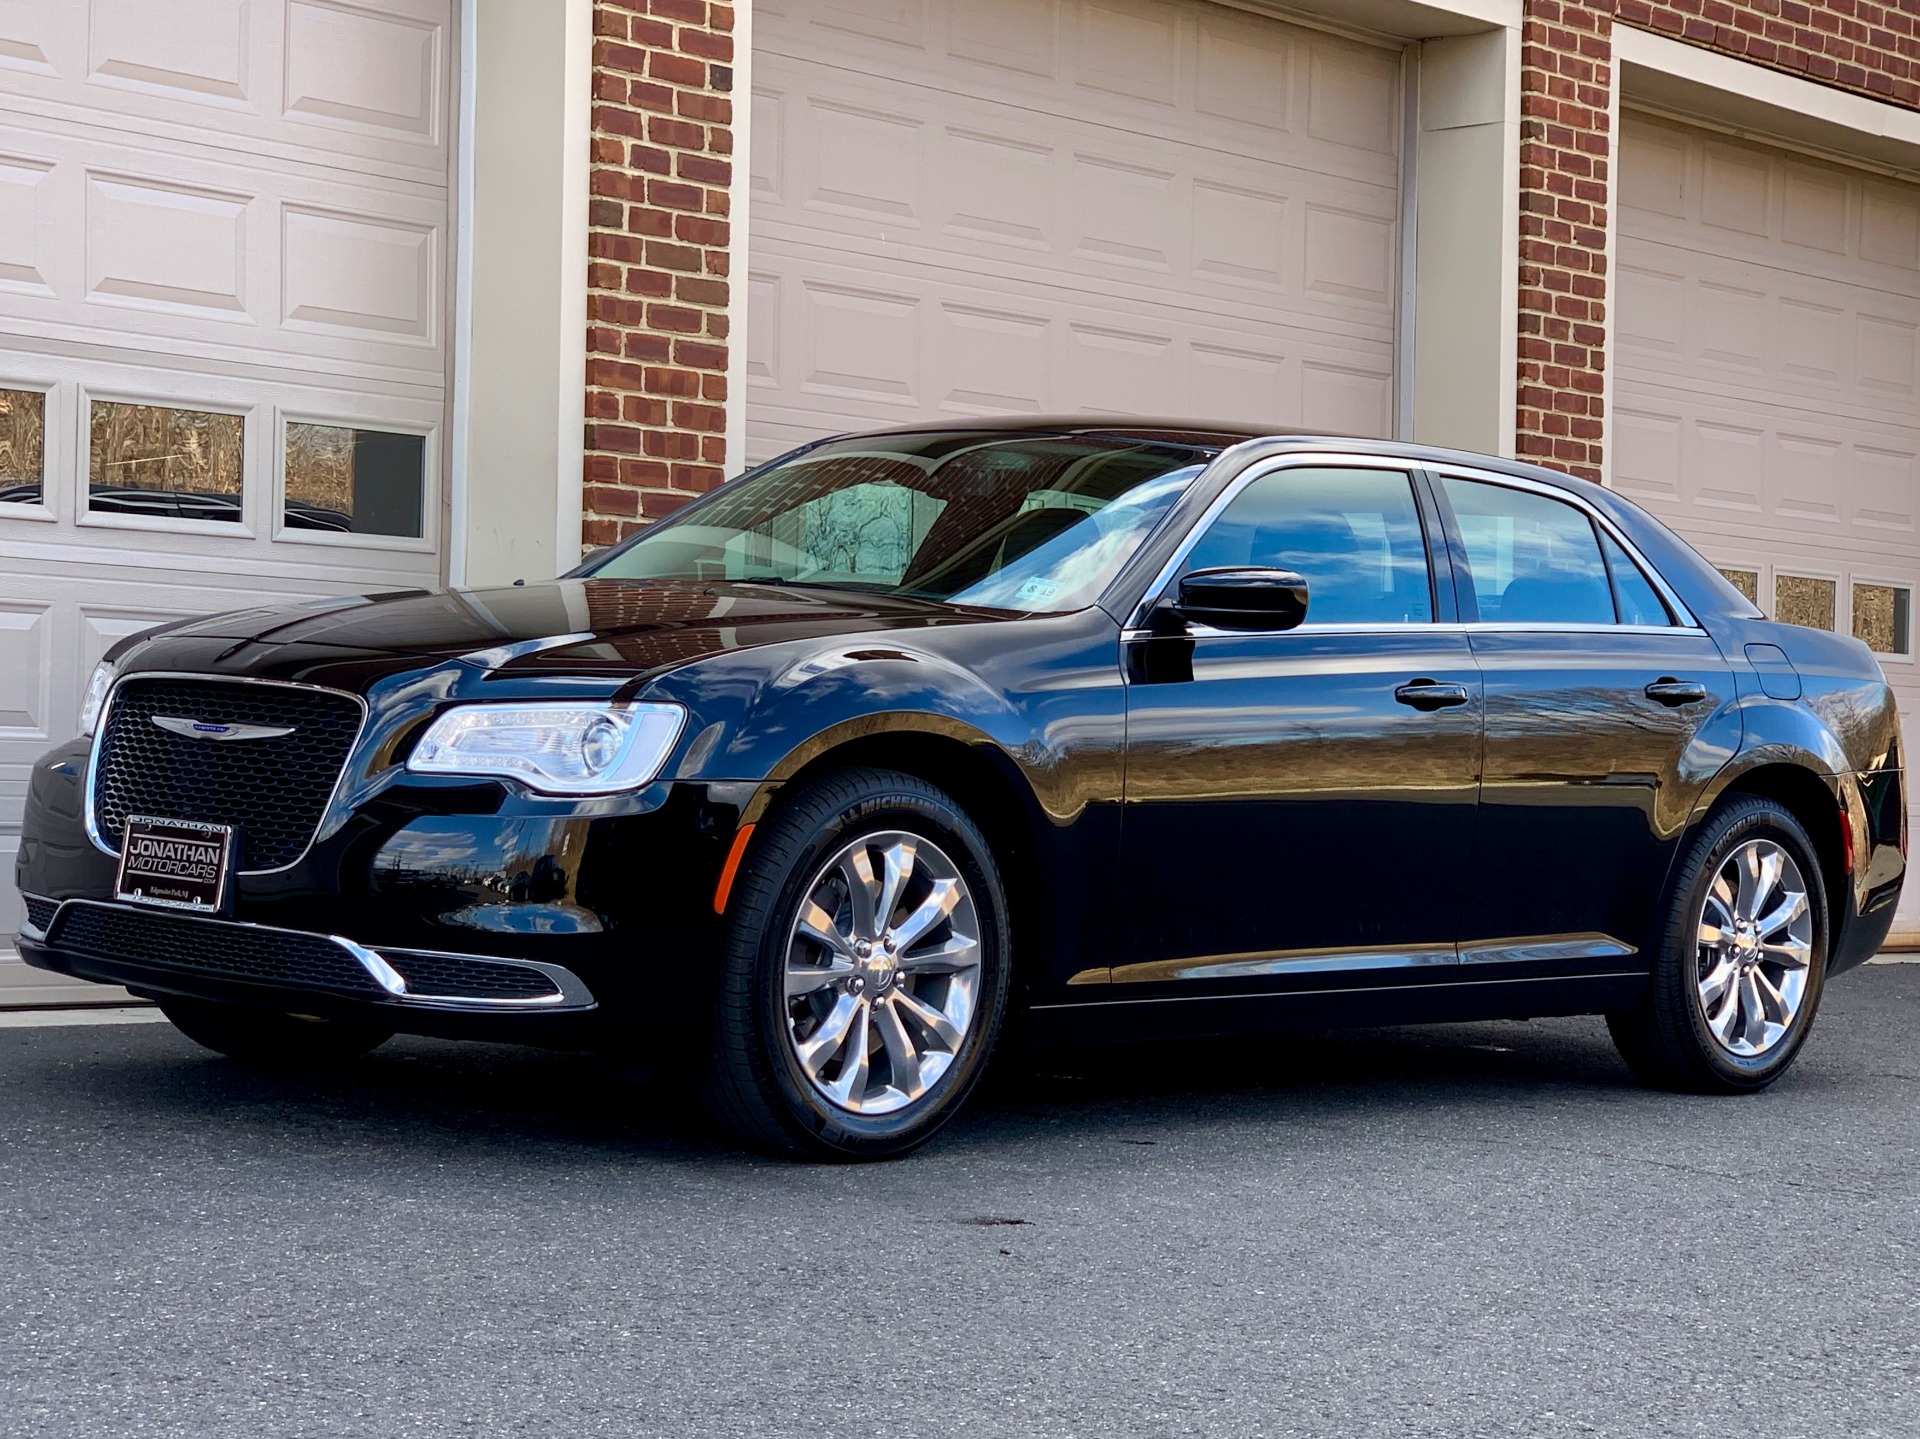 2018 Chrysler 300 Touring L AWD Stock 321209 for sale near Edgewater 